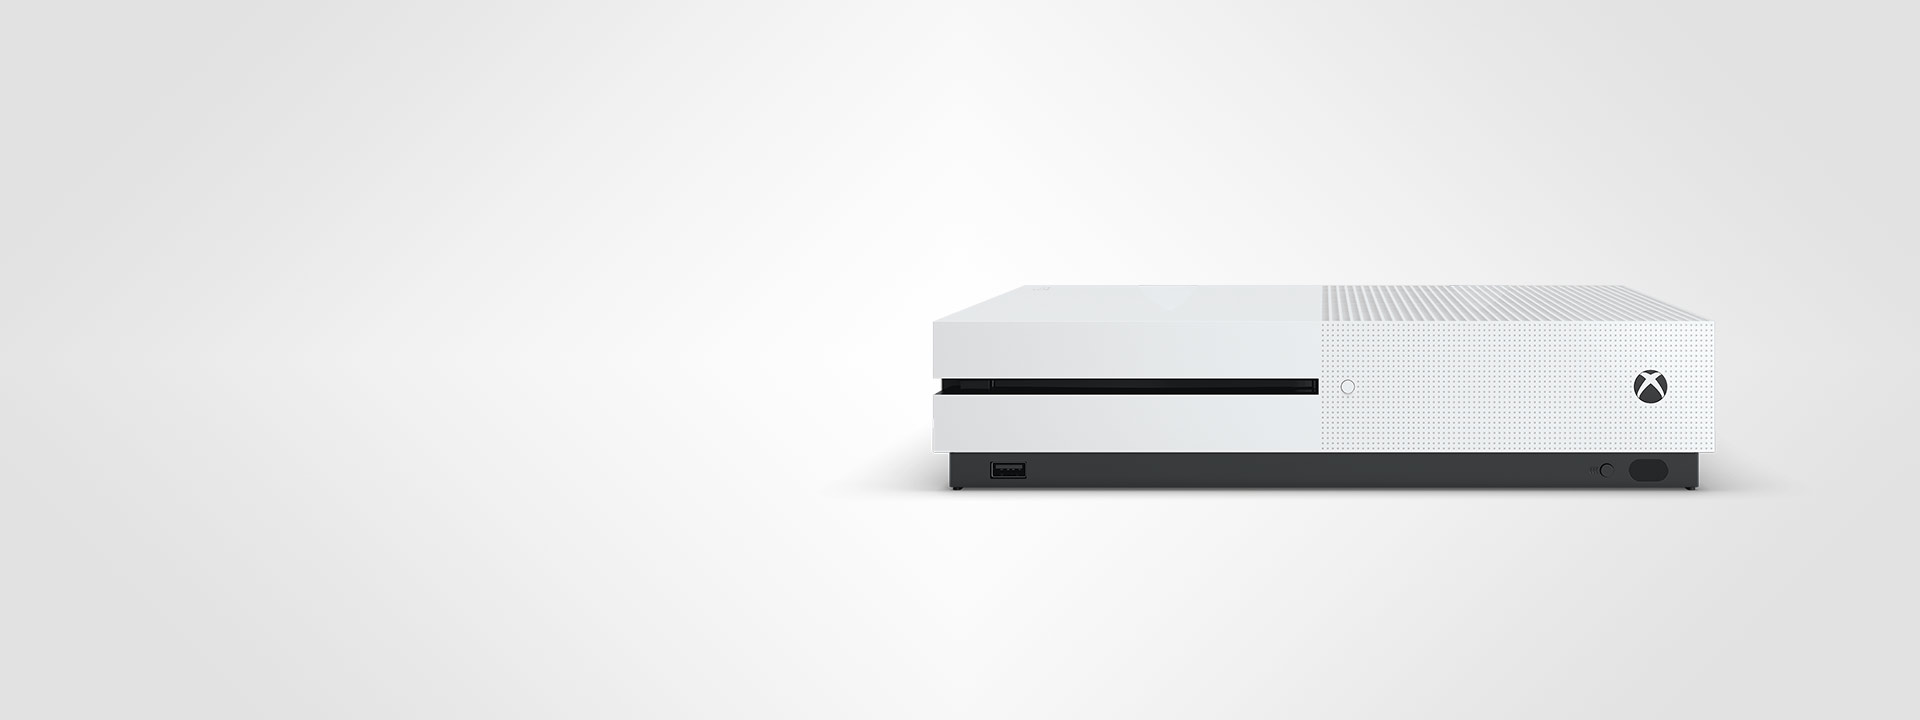 Xbox One S front view